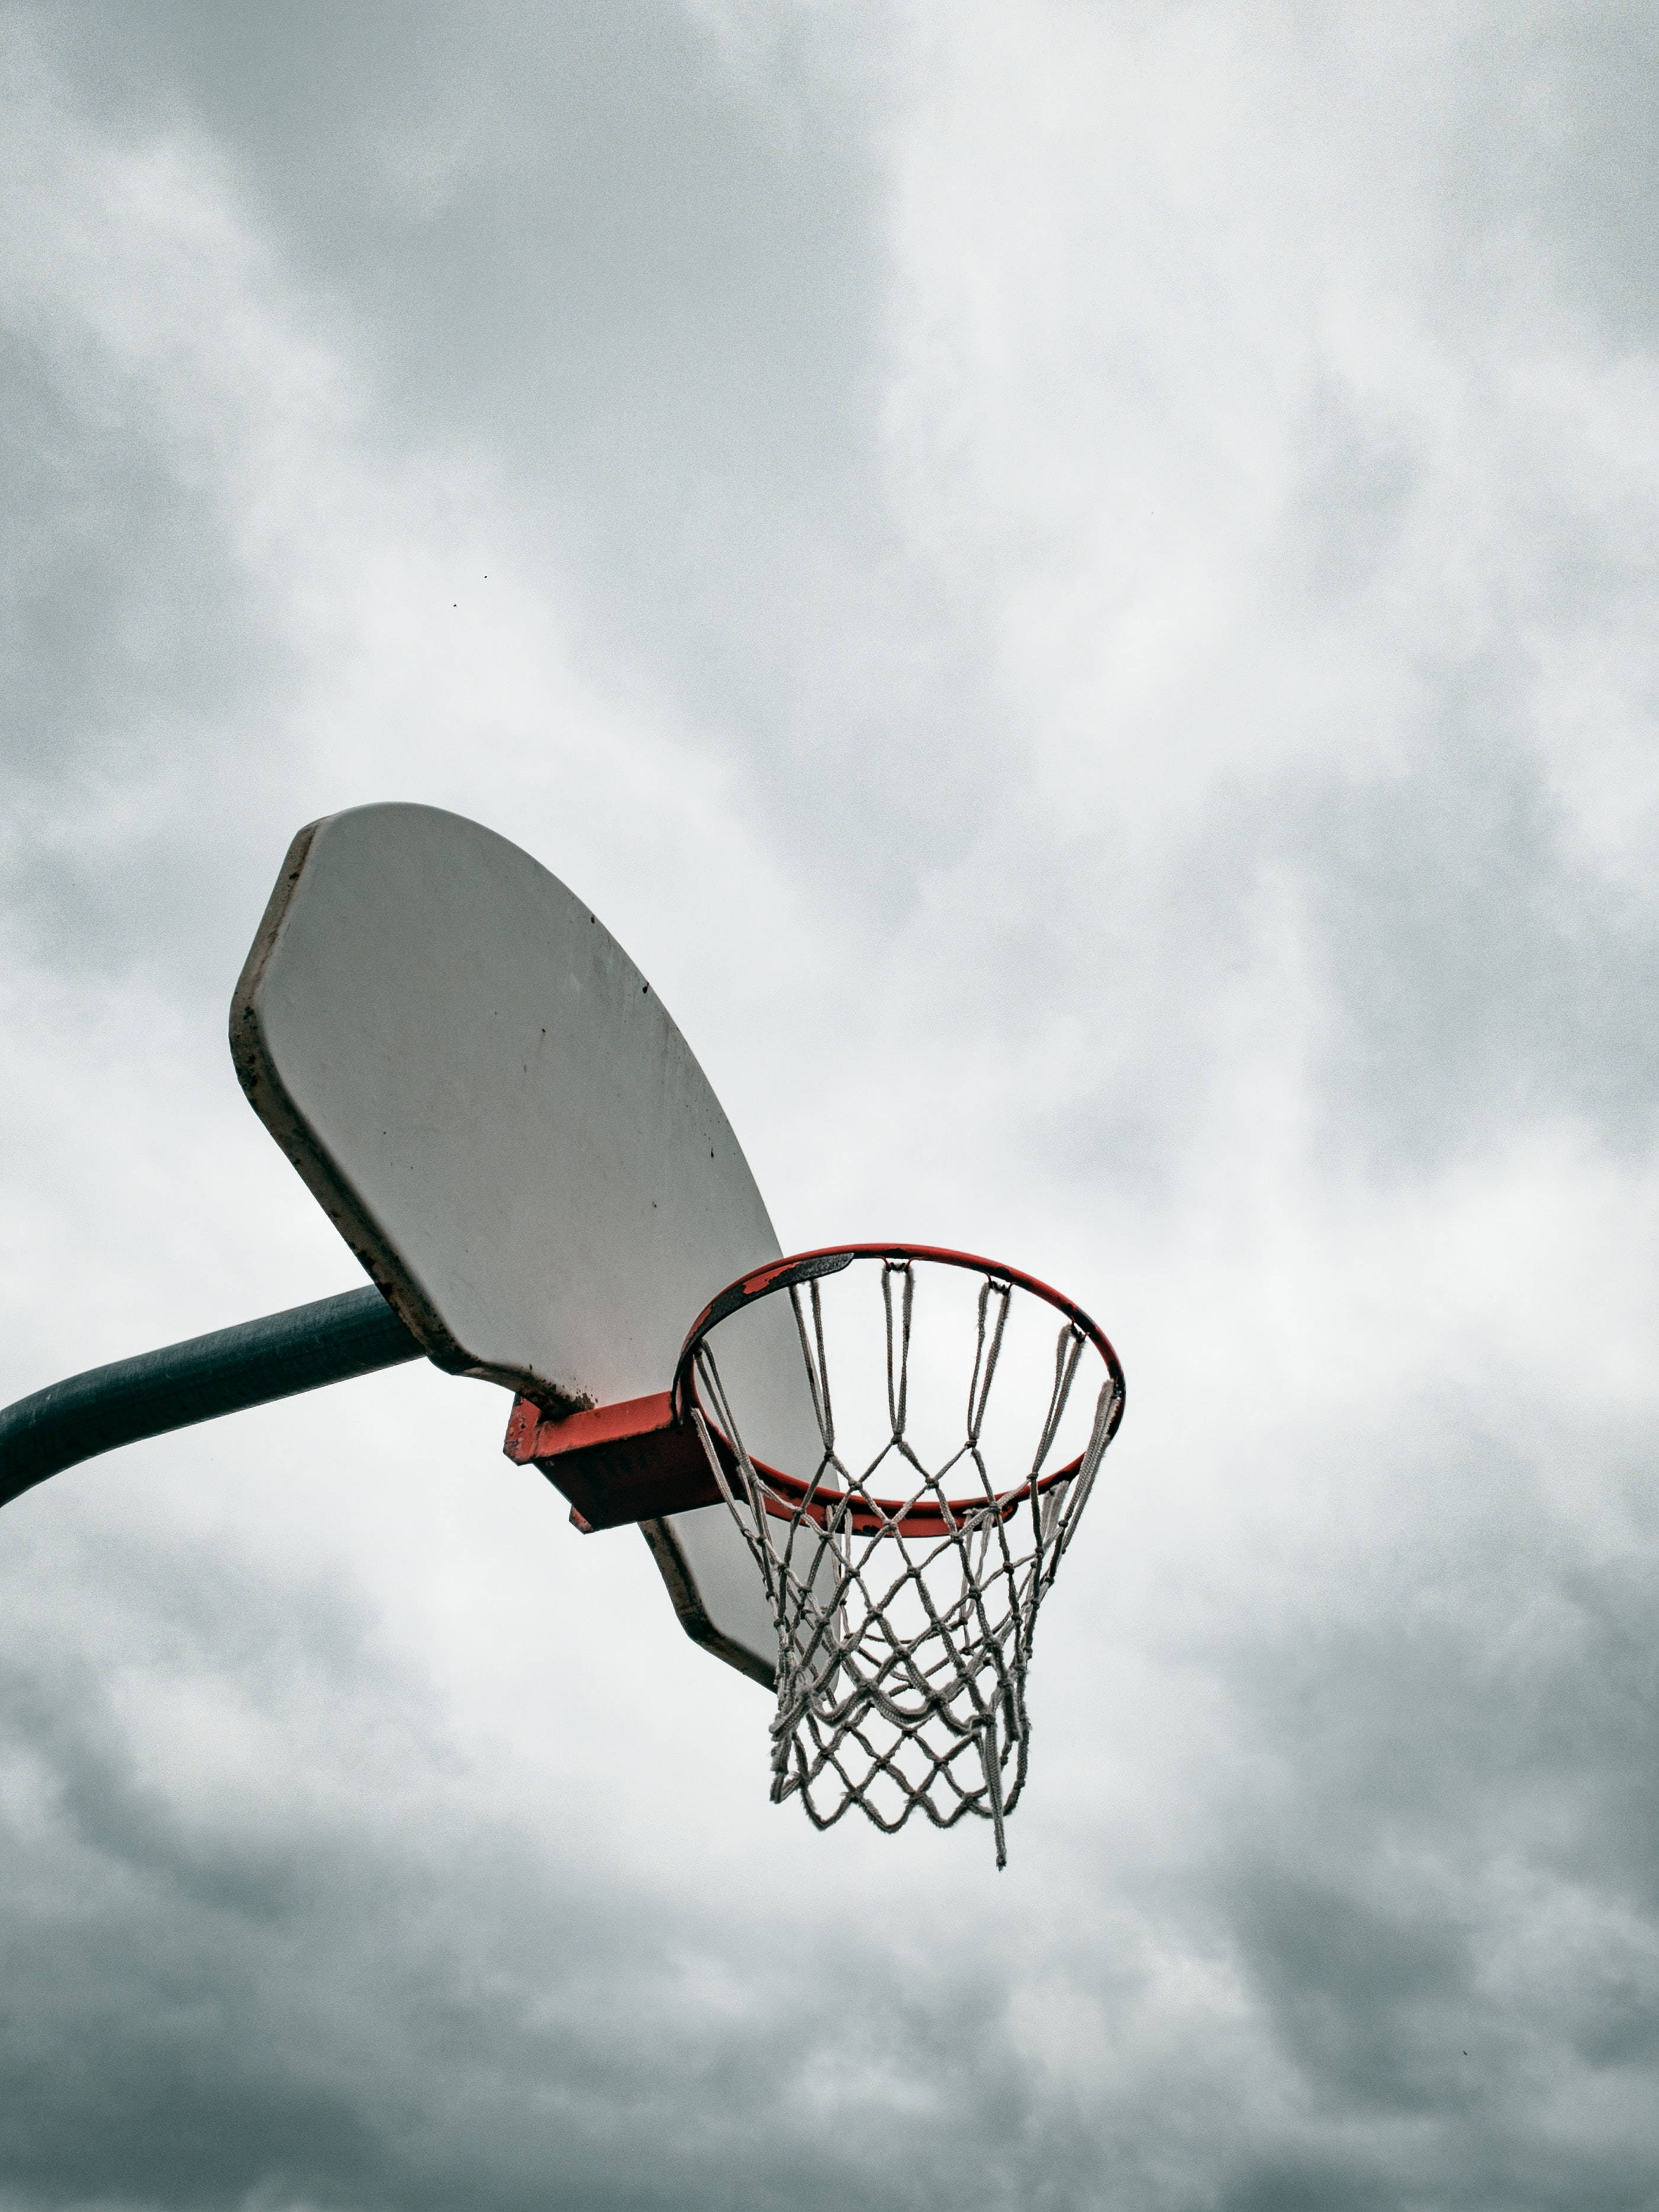 A basketball hoop with a cloudy sky in the background. - Basketball